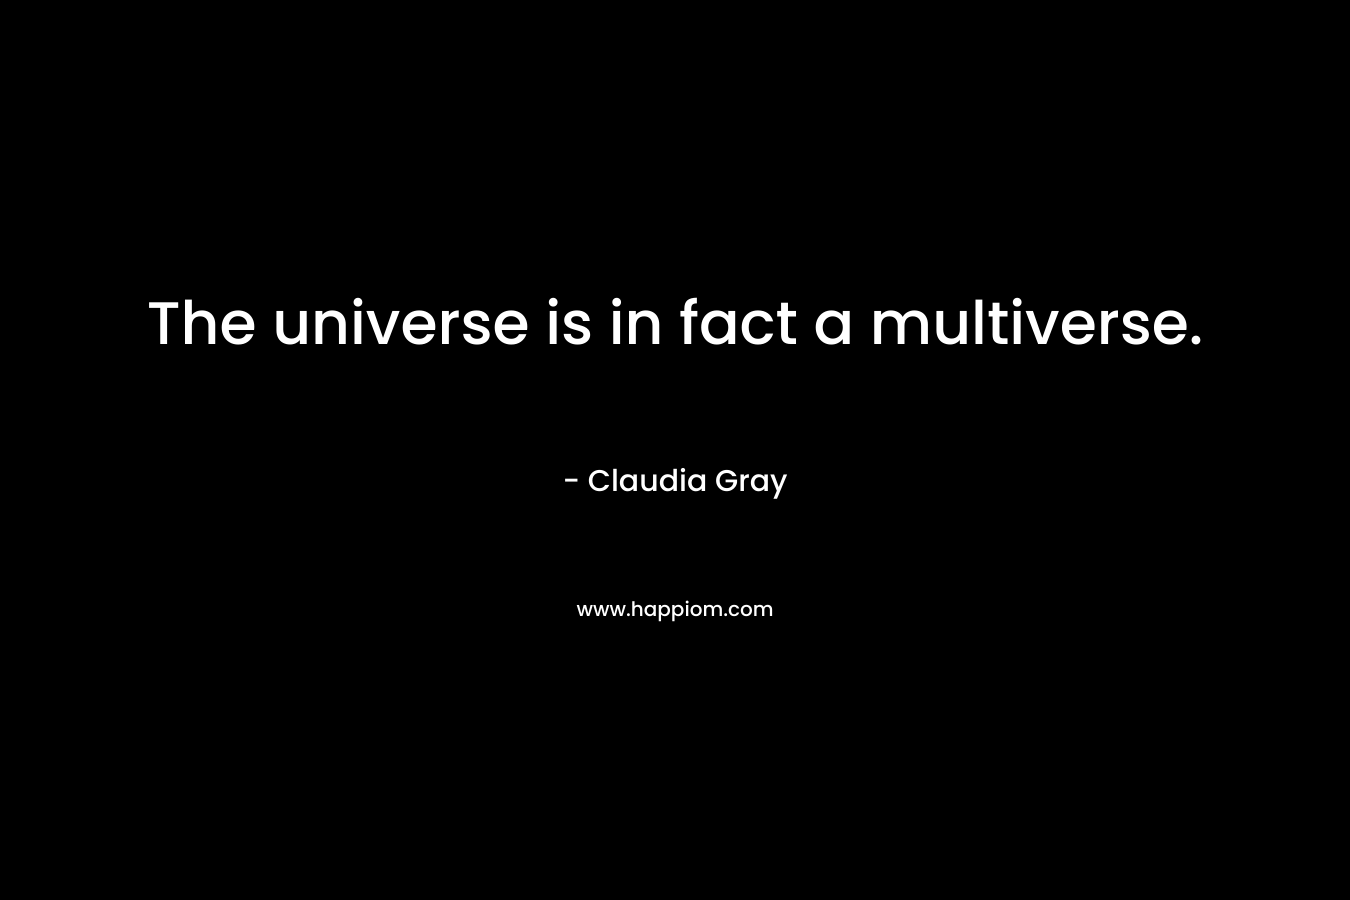 The universe is in fact a multiverse. – Claudia Gray